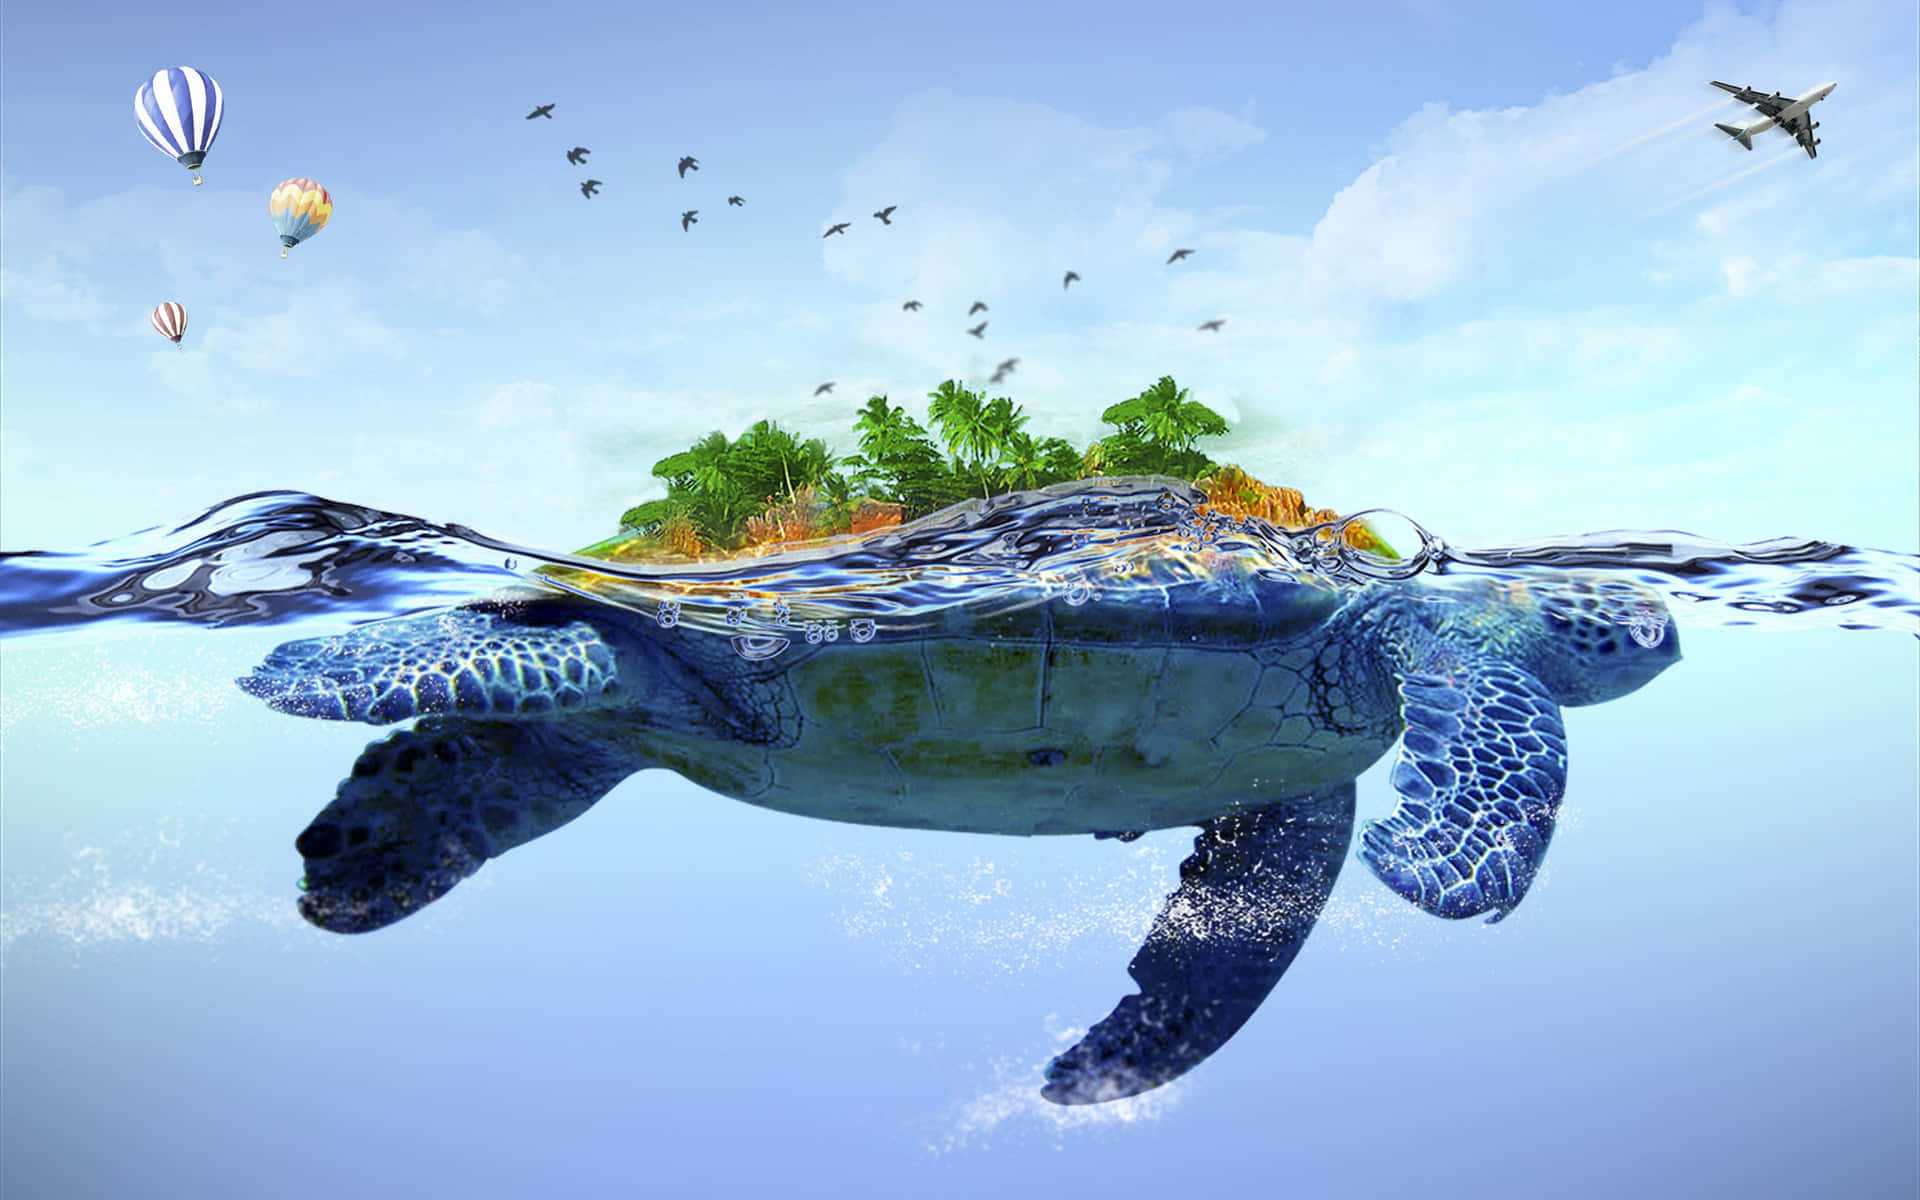 a turtle swimming in the ocean with a tree and balloons